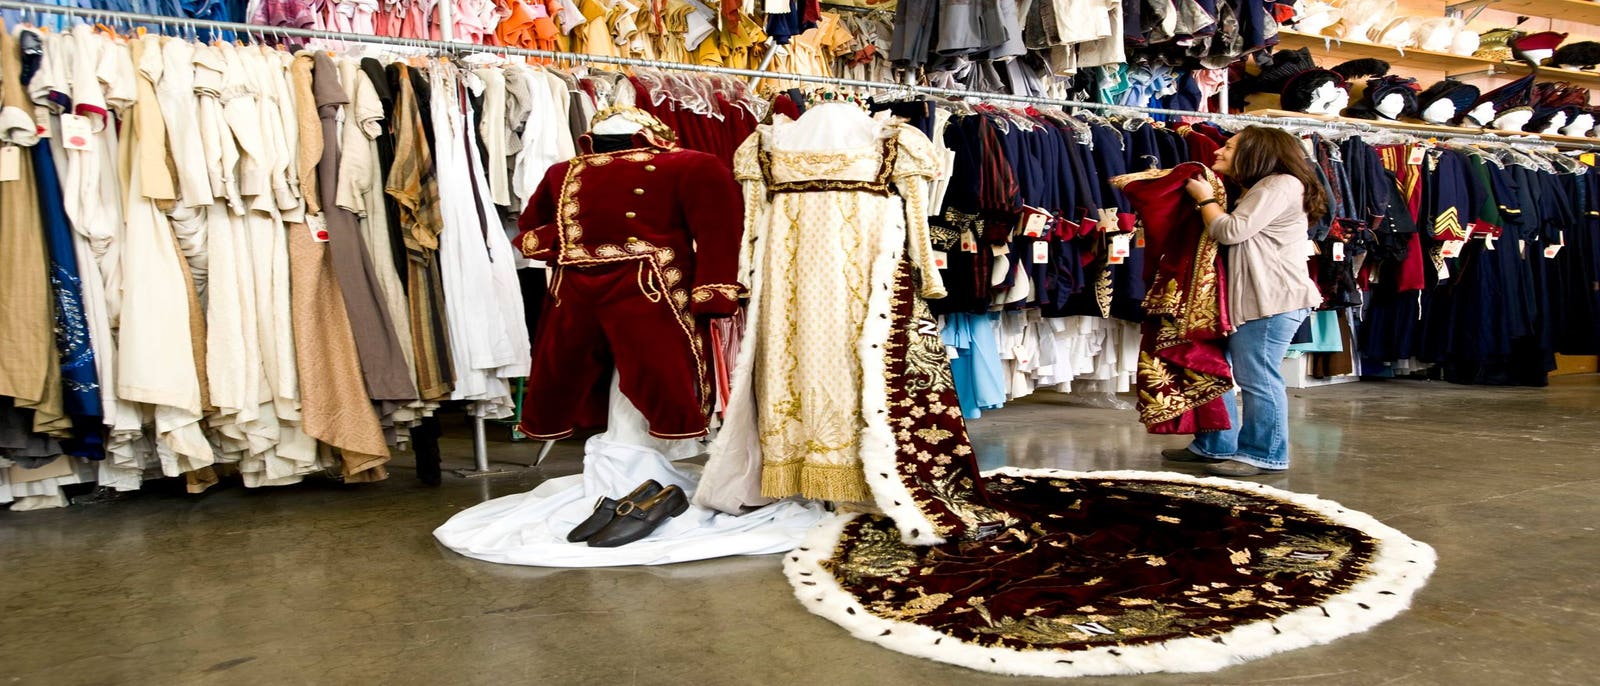 The Top 10 Costume Shops in Los Angeles | Discover Los Angeles